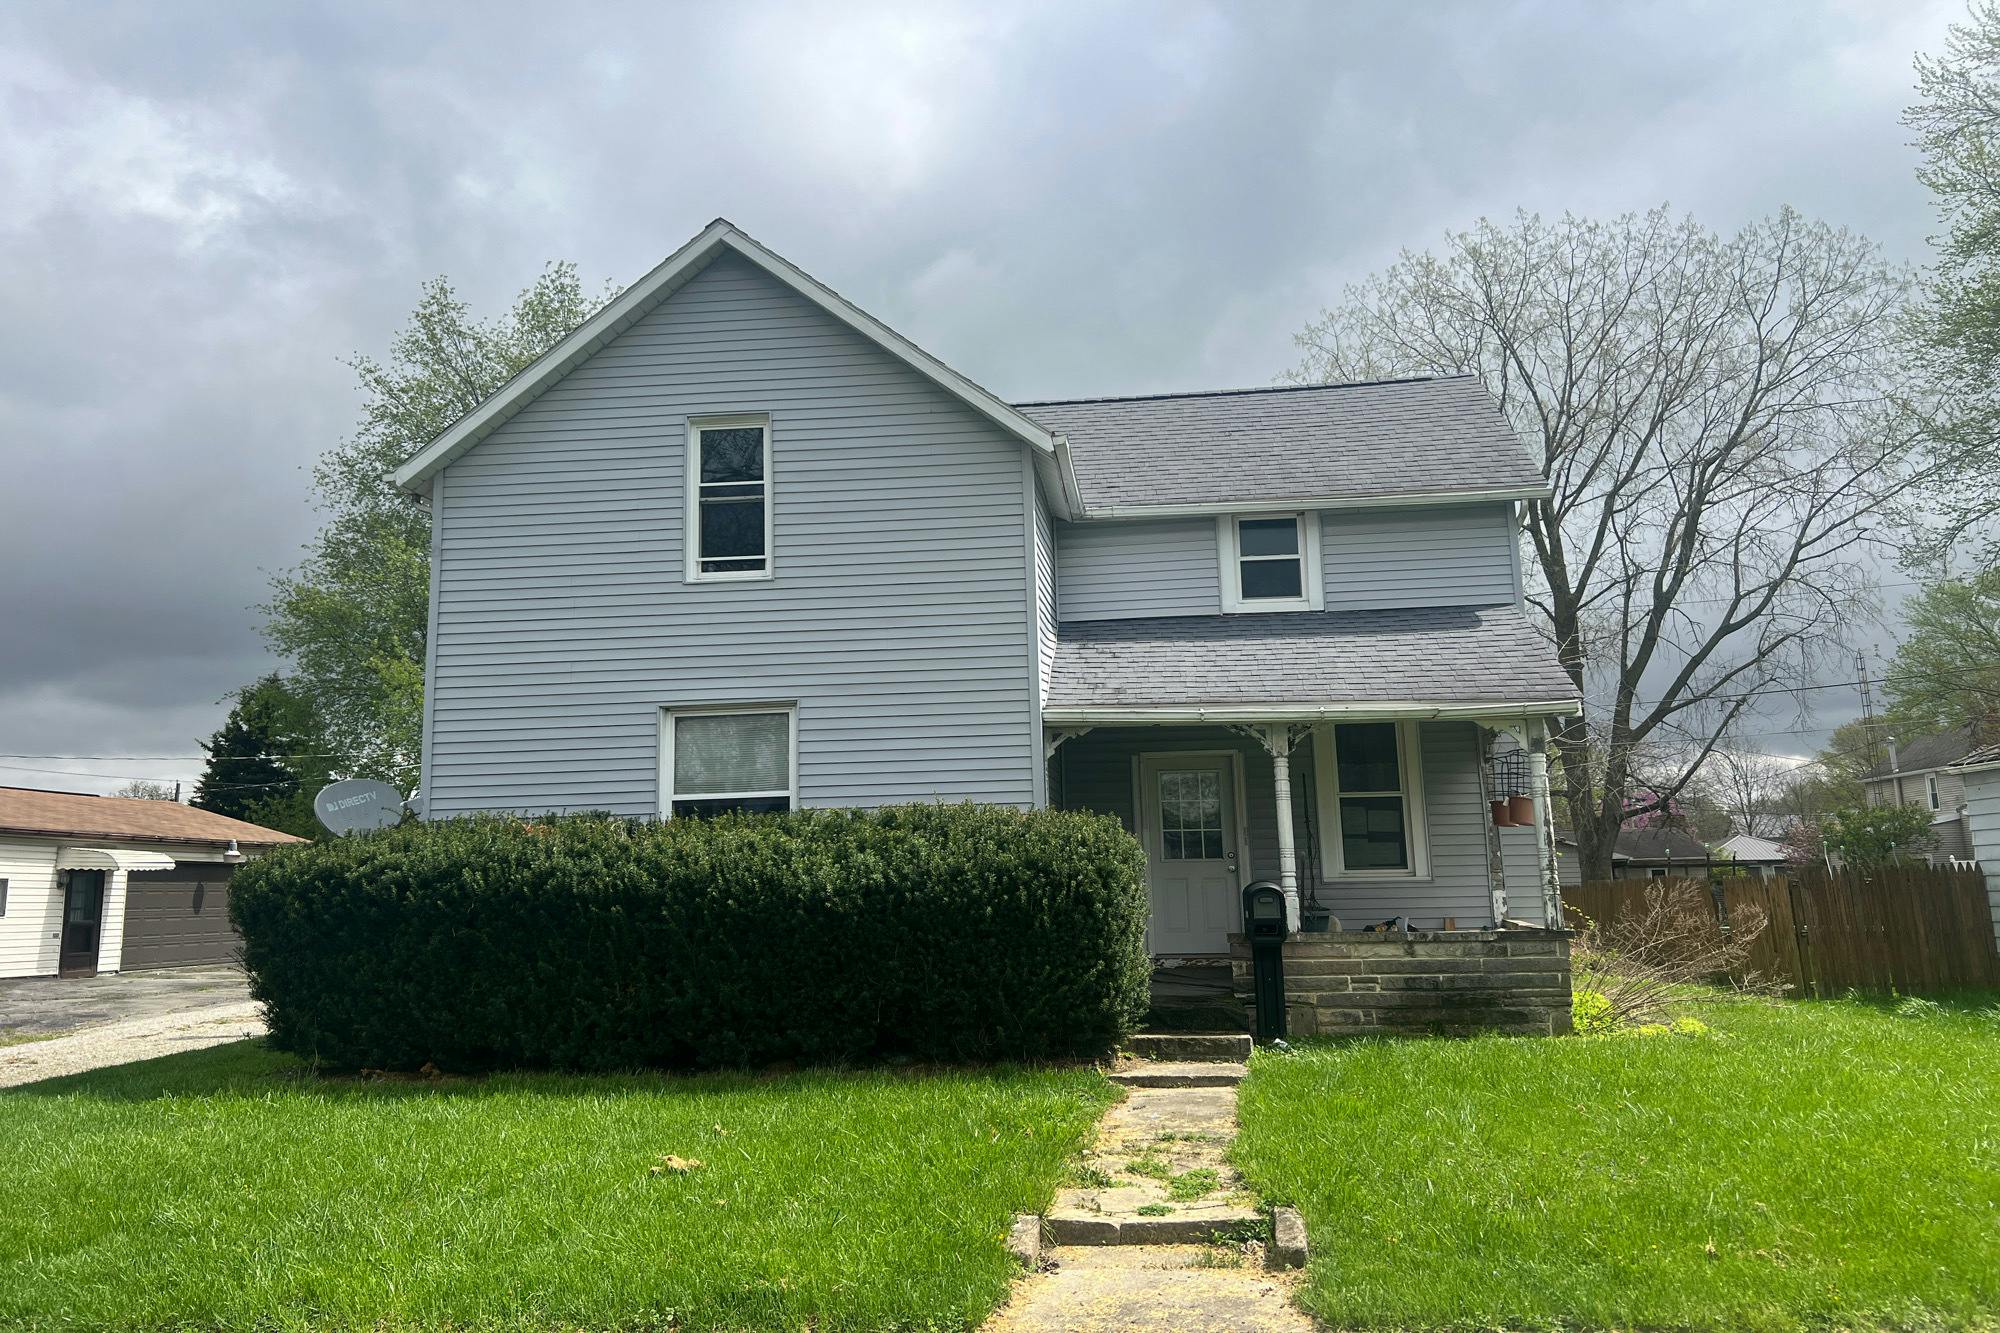 Maple St, Bucyrus, OH 44820